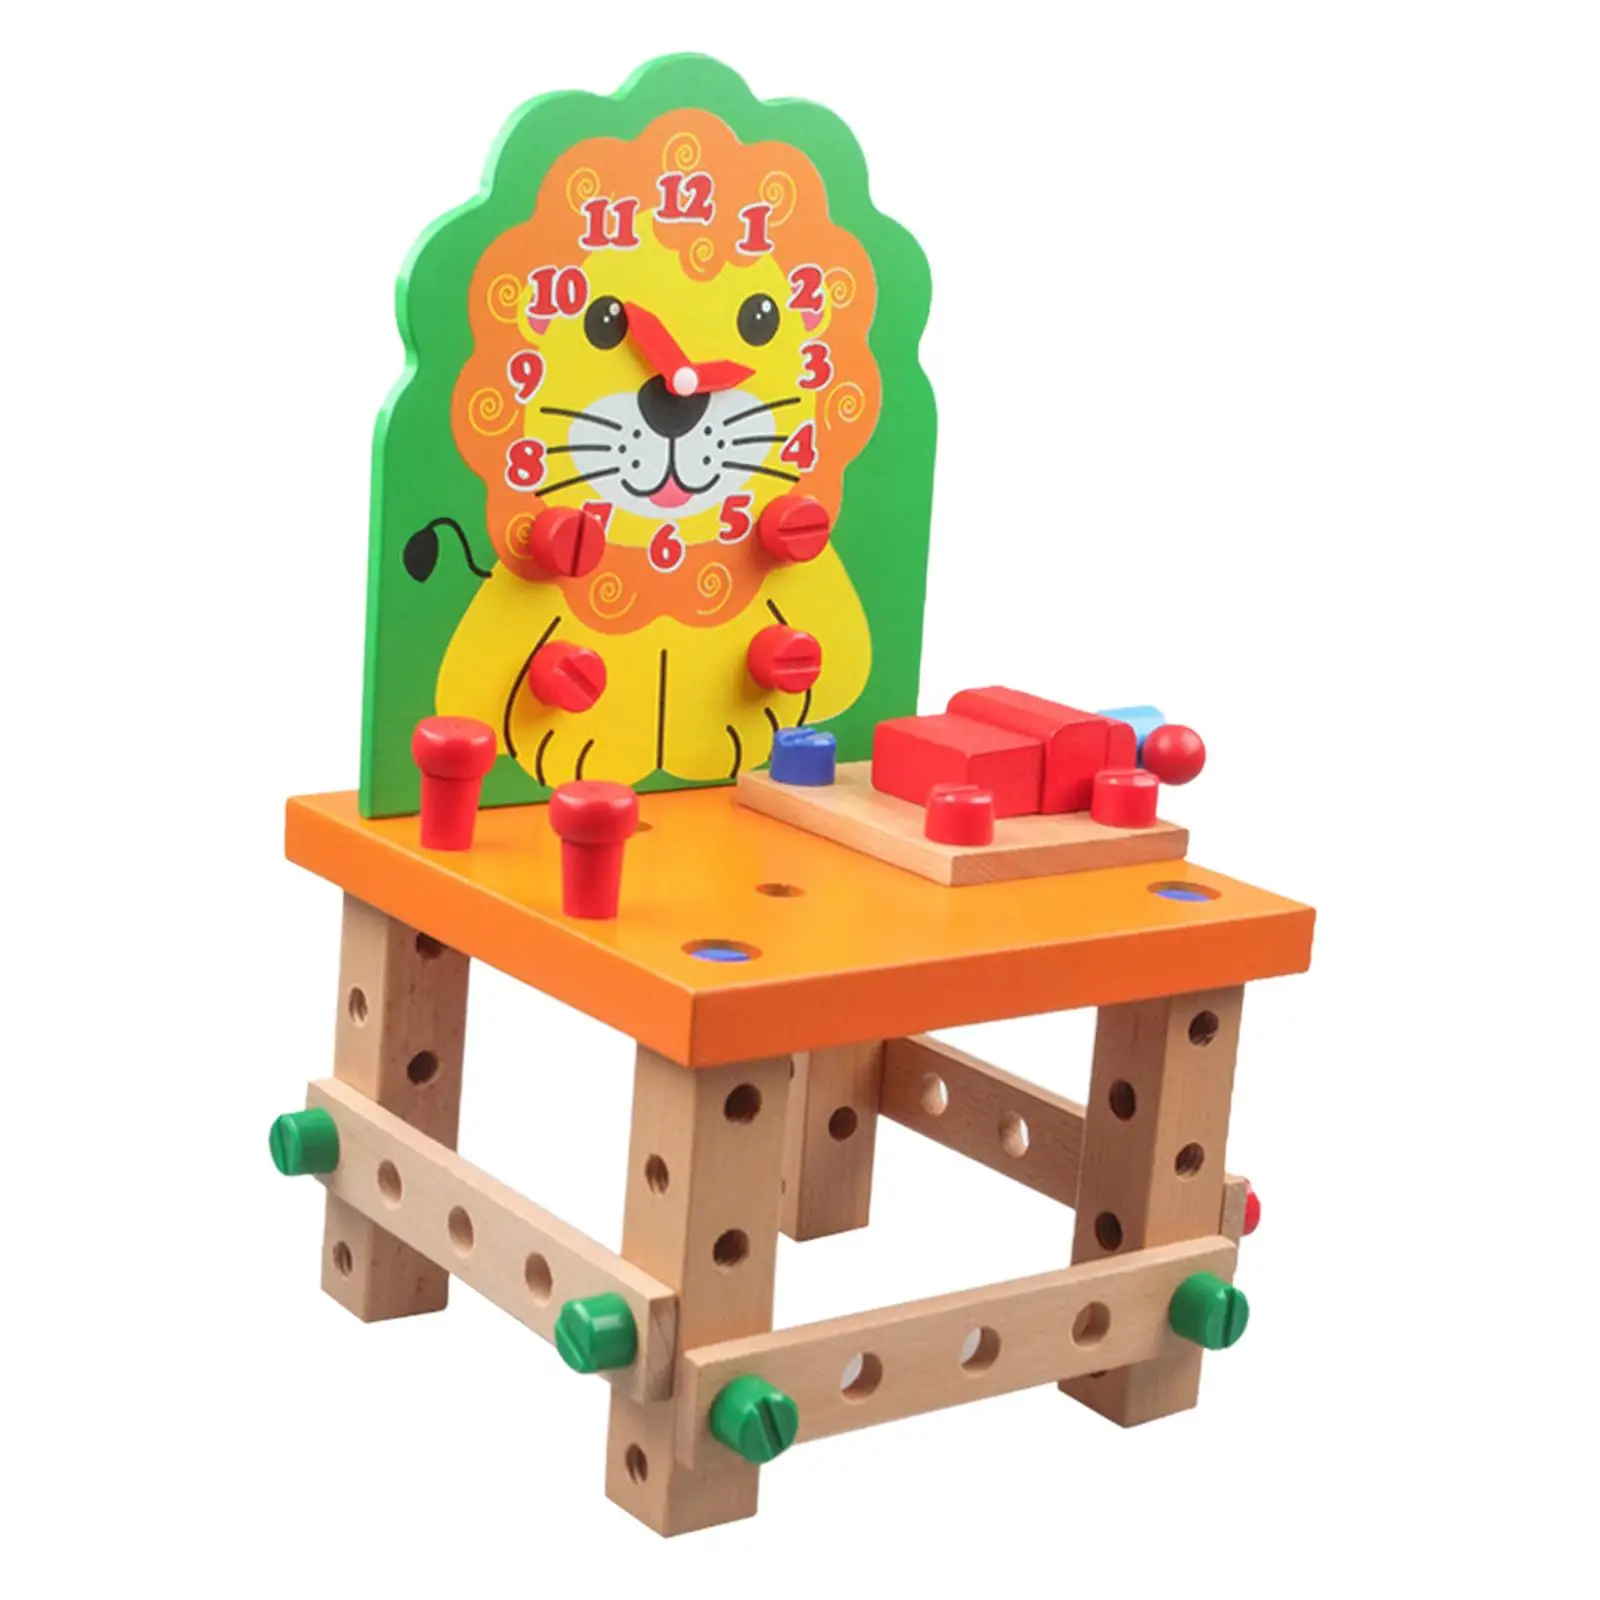 Wooden Chair Models Construction Play Set with Tools Nuts and Bolts Kids Wooden Project Woodworking Kit for Girls Boys Gifts